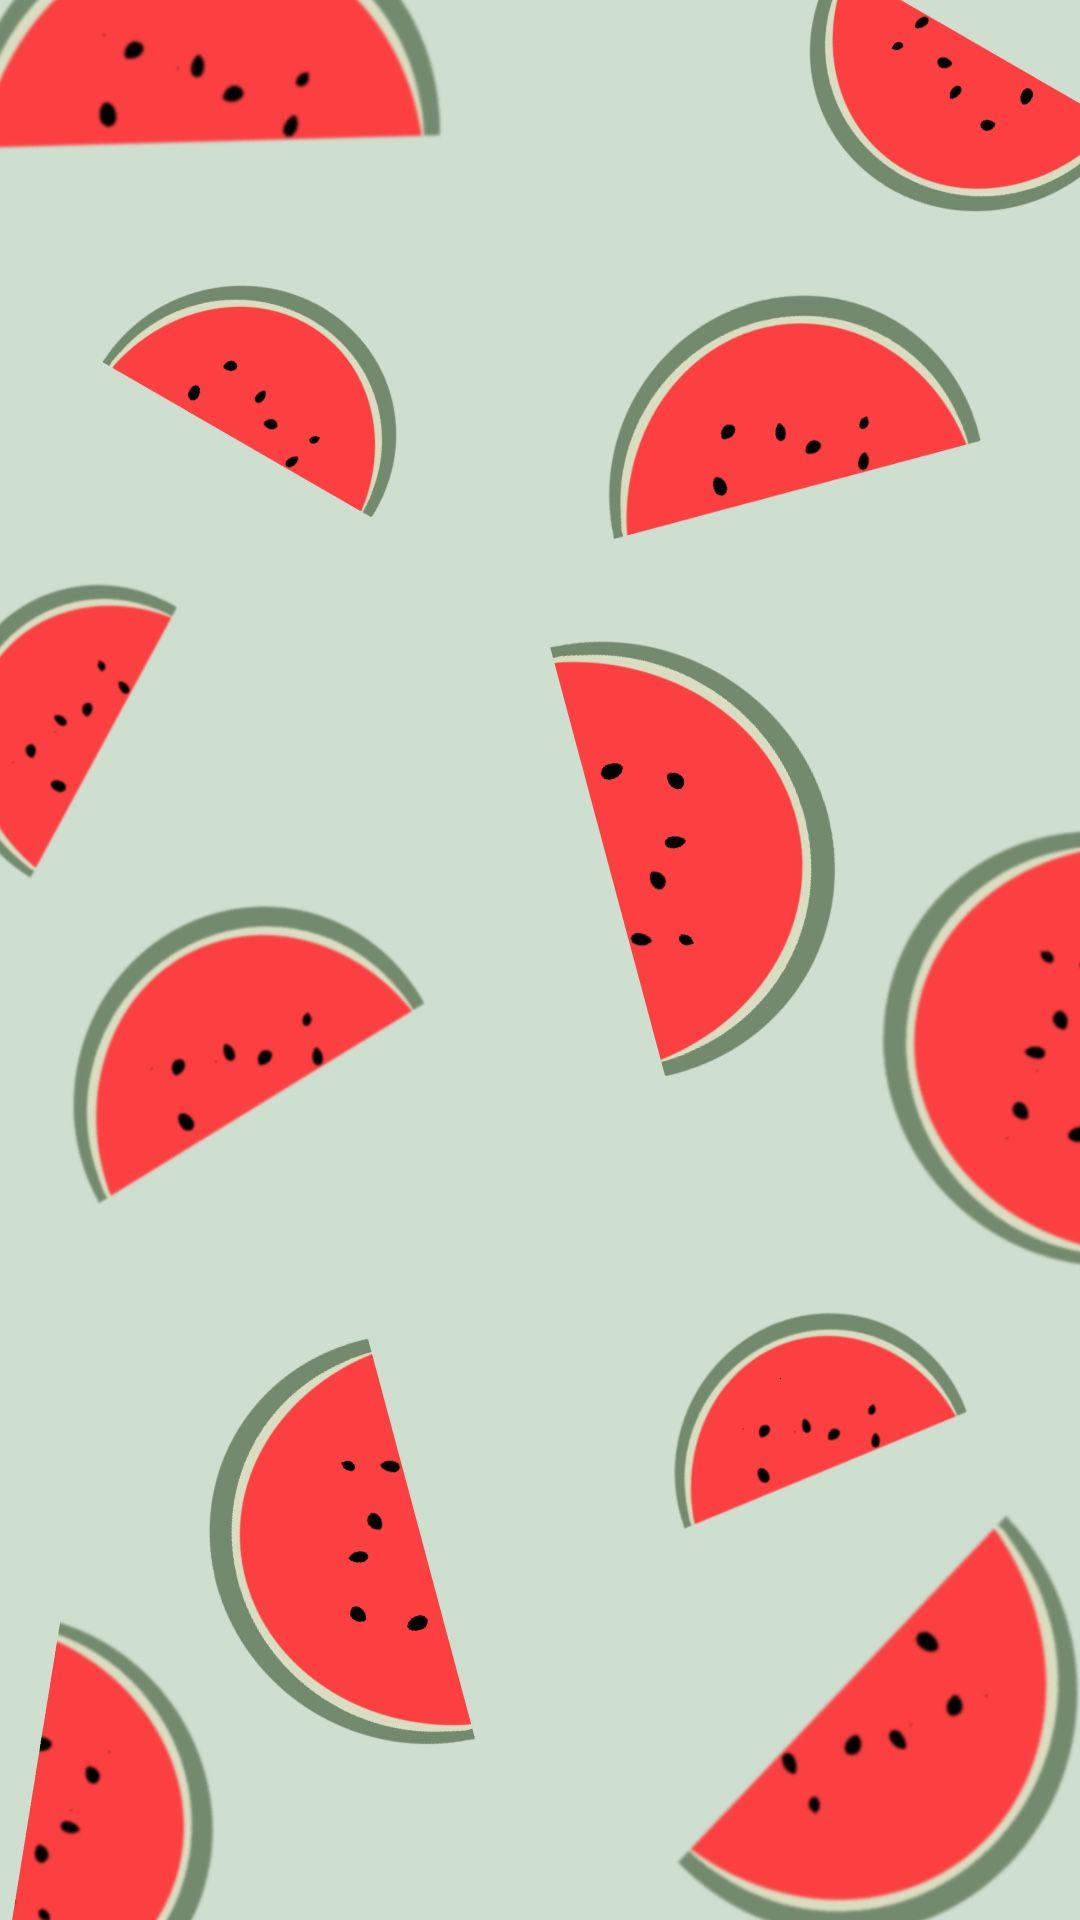 Watermelon slices on a green background - Watermelon